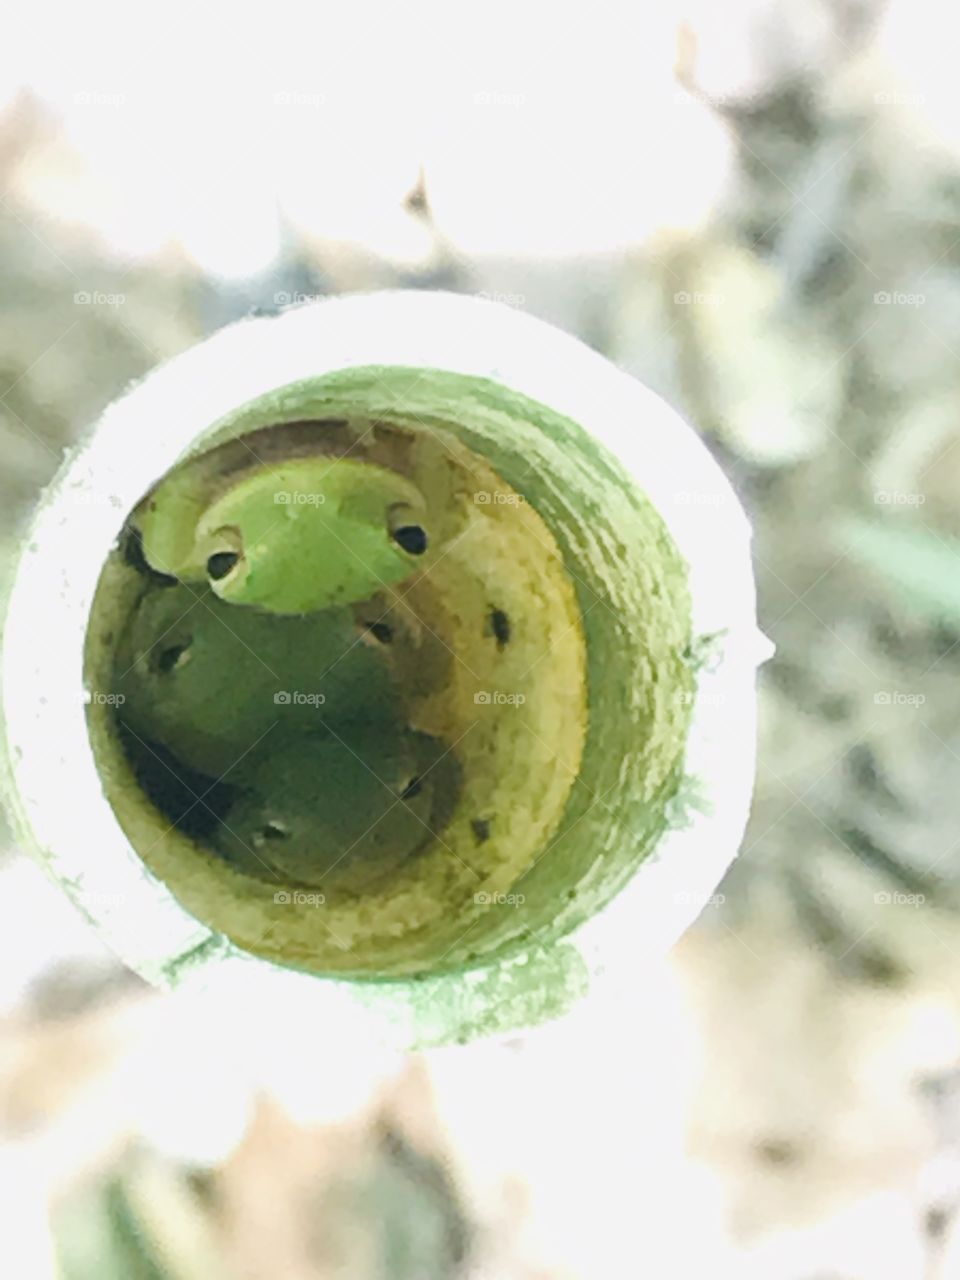 Little green frogs found hiding in a circle in the form of a pvc pipe in the woods of South Georgia. 